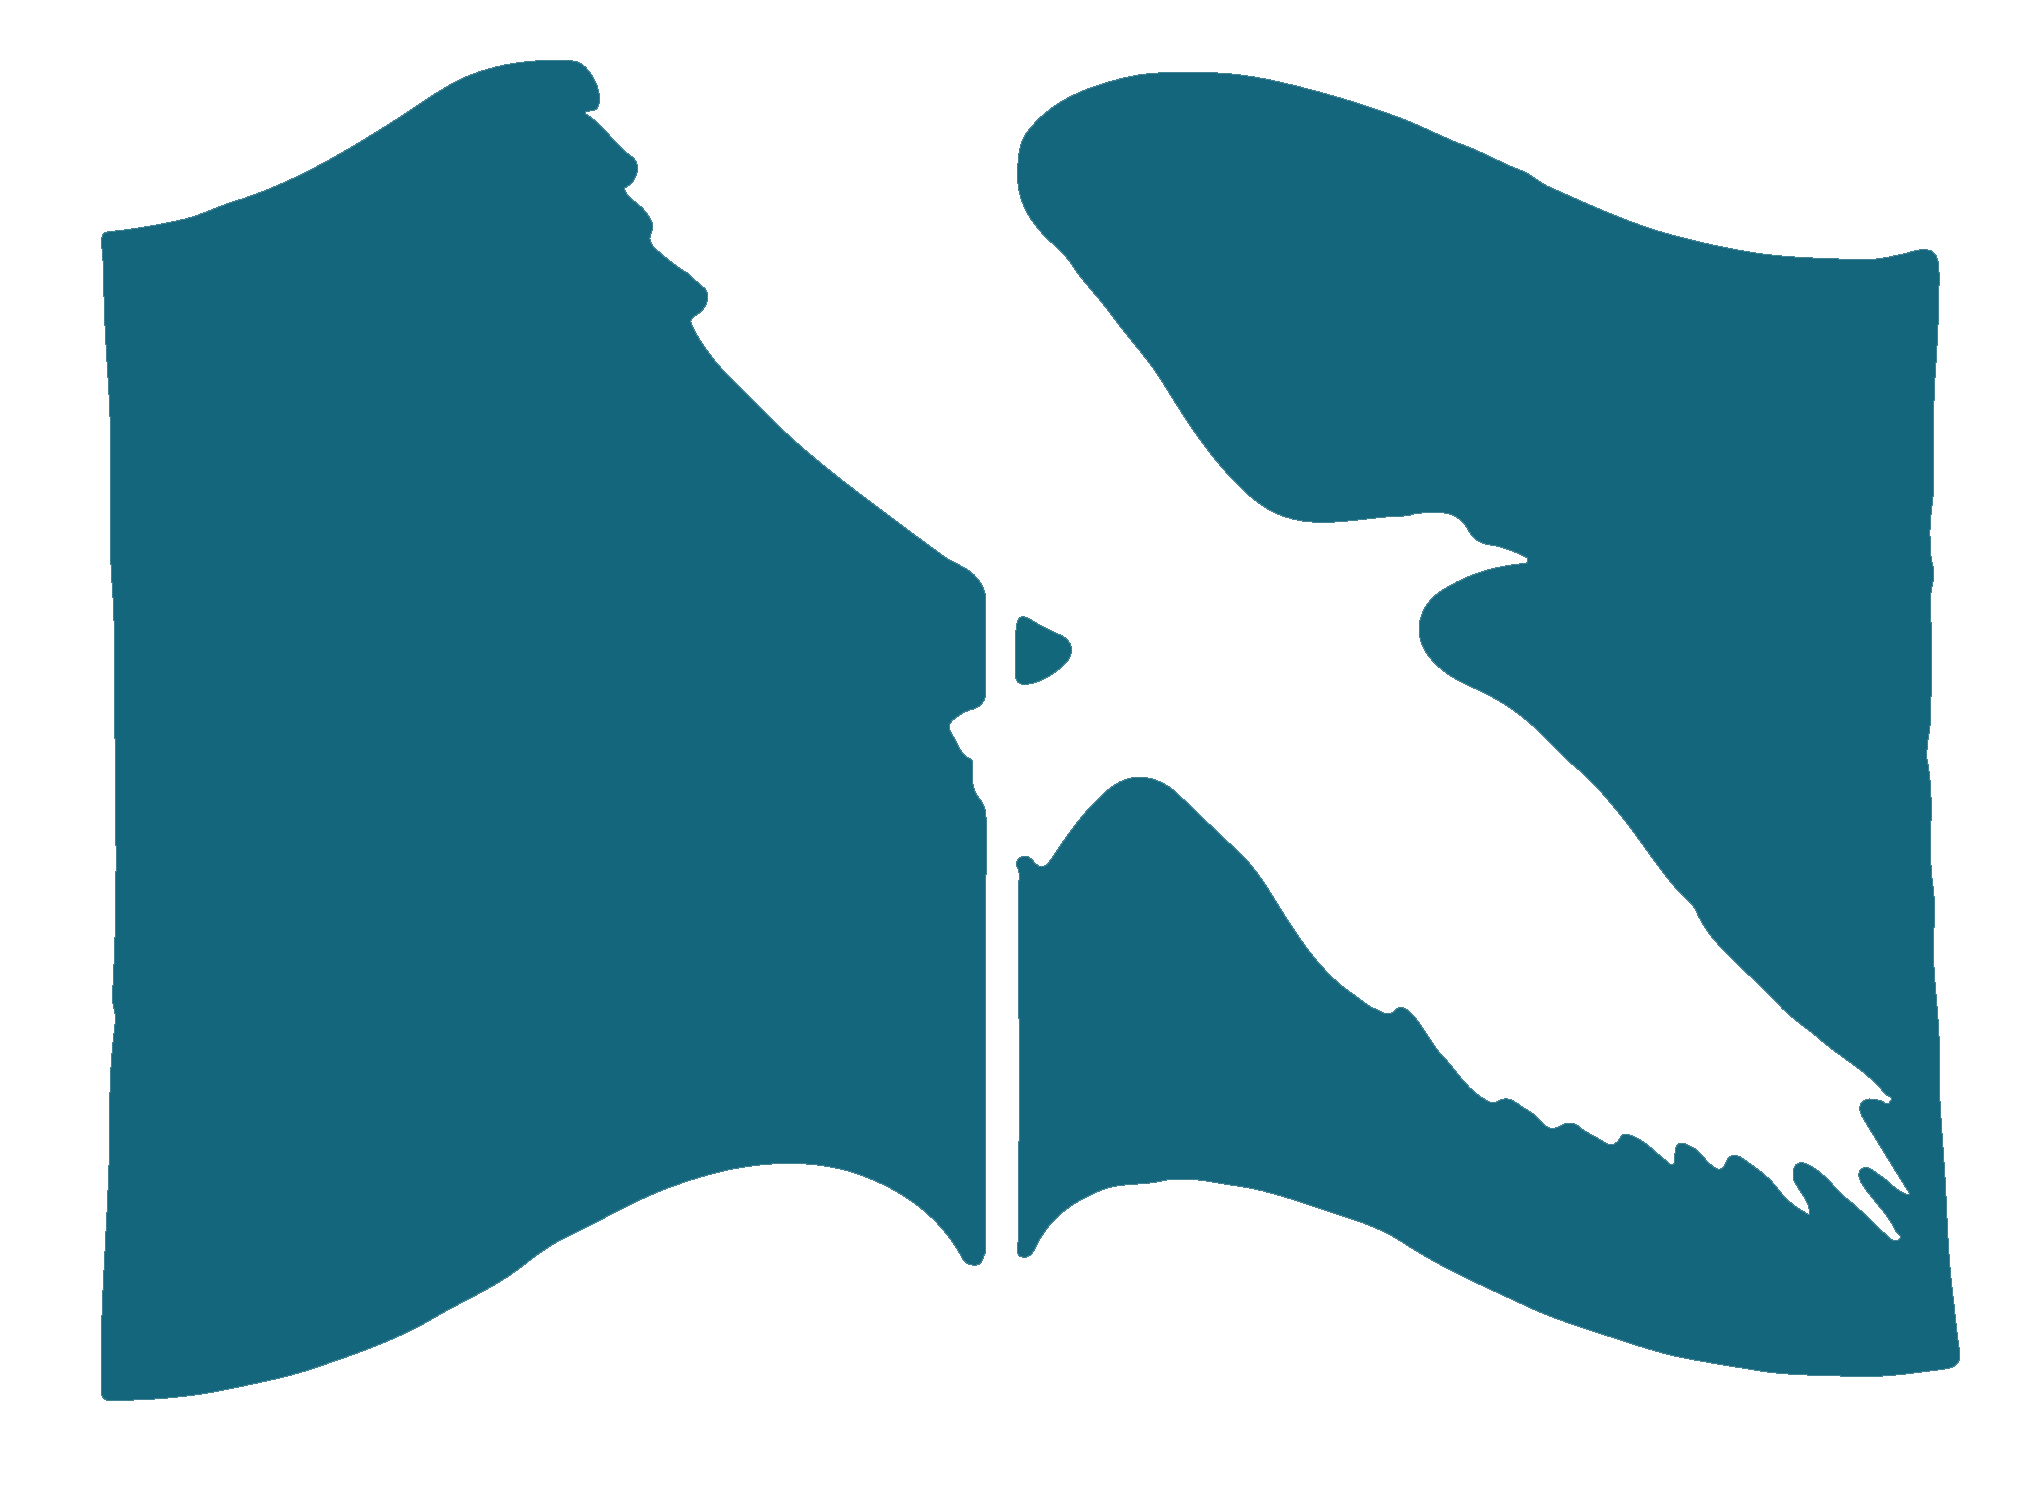 Logo of flying dove imprinted over a teal book